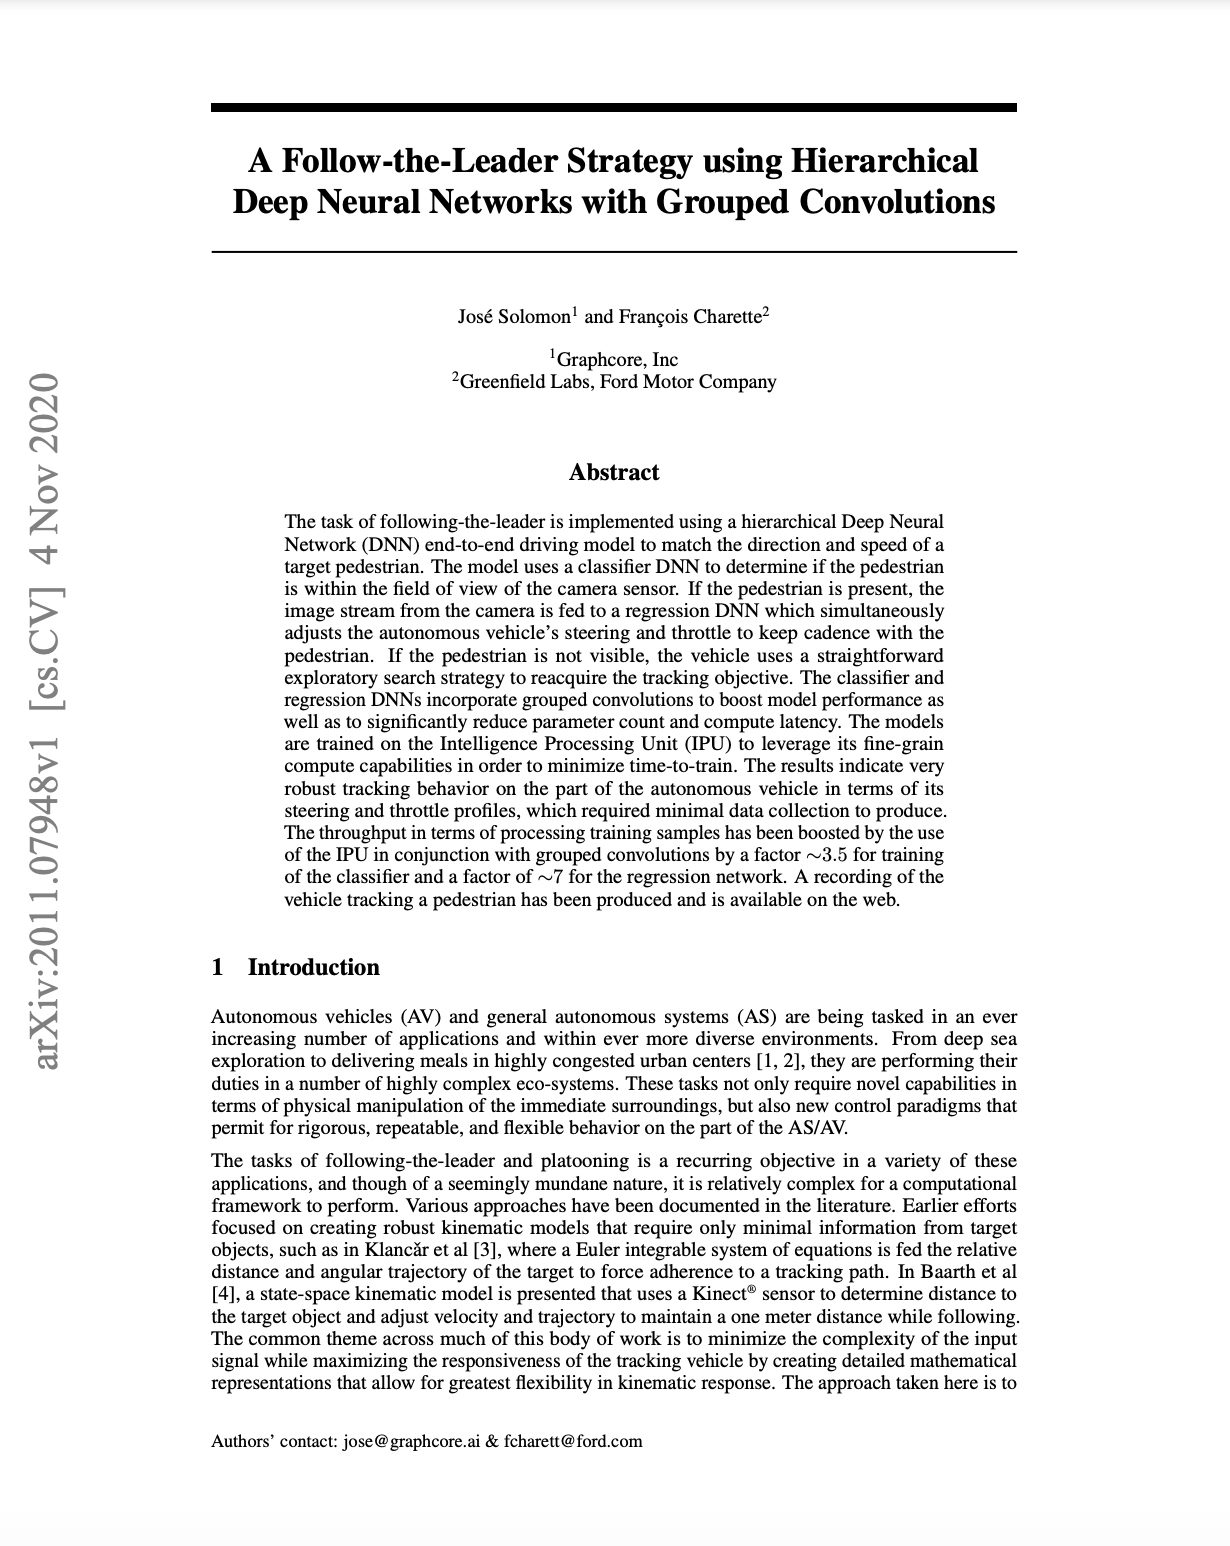 Graphcore & Ford: A Follow-The-Leader Strategy using Hierarchical Deep Neural Networks with Grouped Convolutions